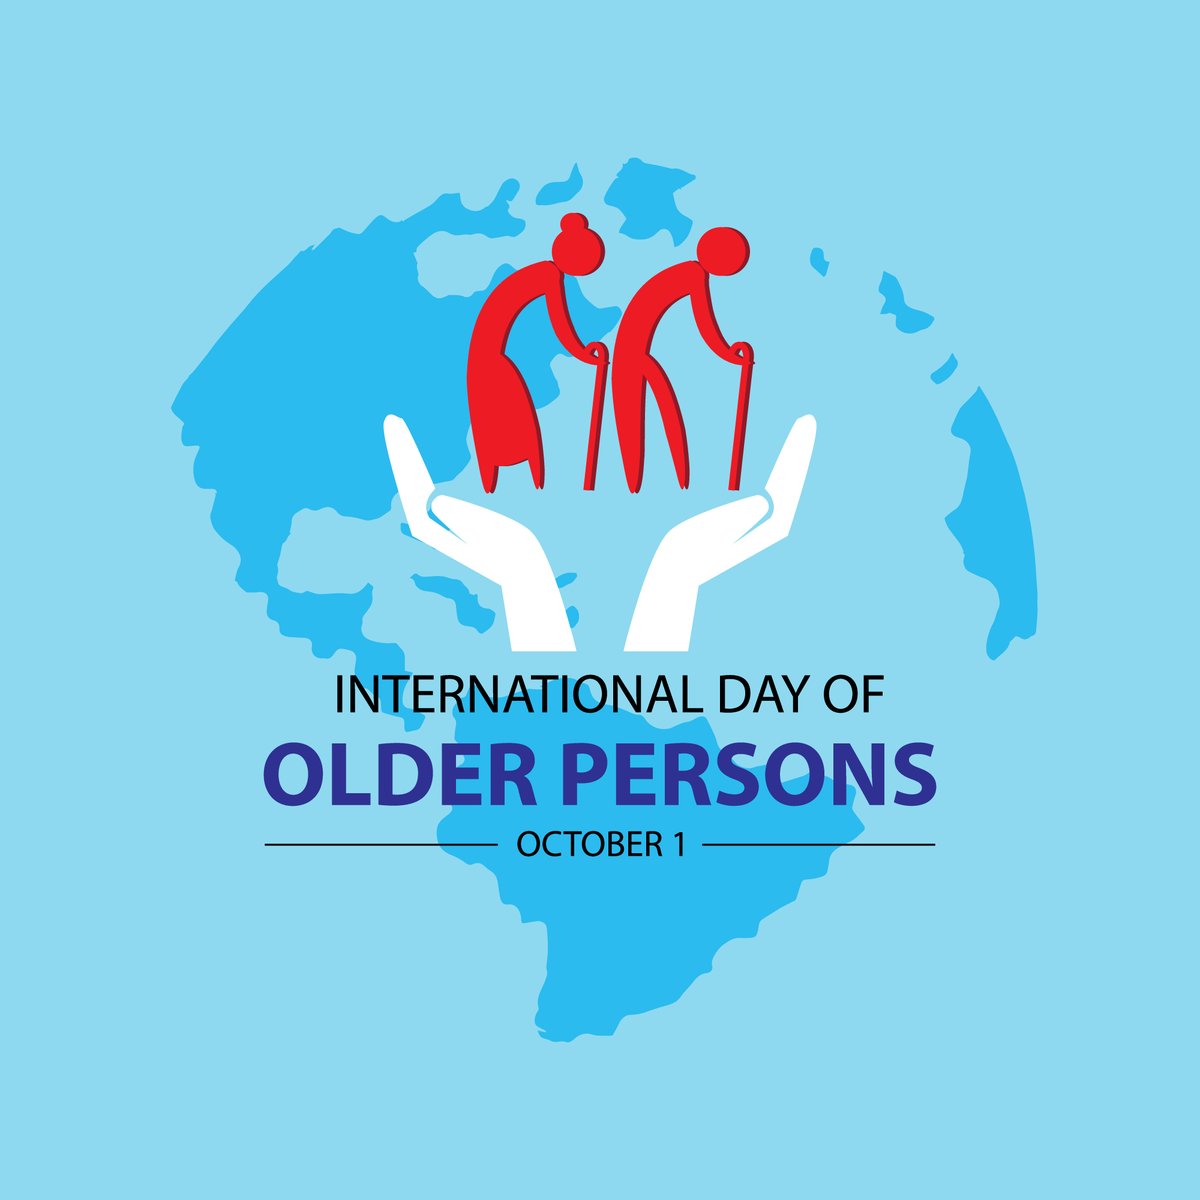 SECRETARYGENERAL’S MESSAGE ON THE INTERNATIONAL DAY OF OLDER PERSONS